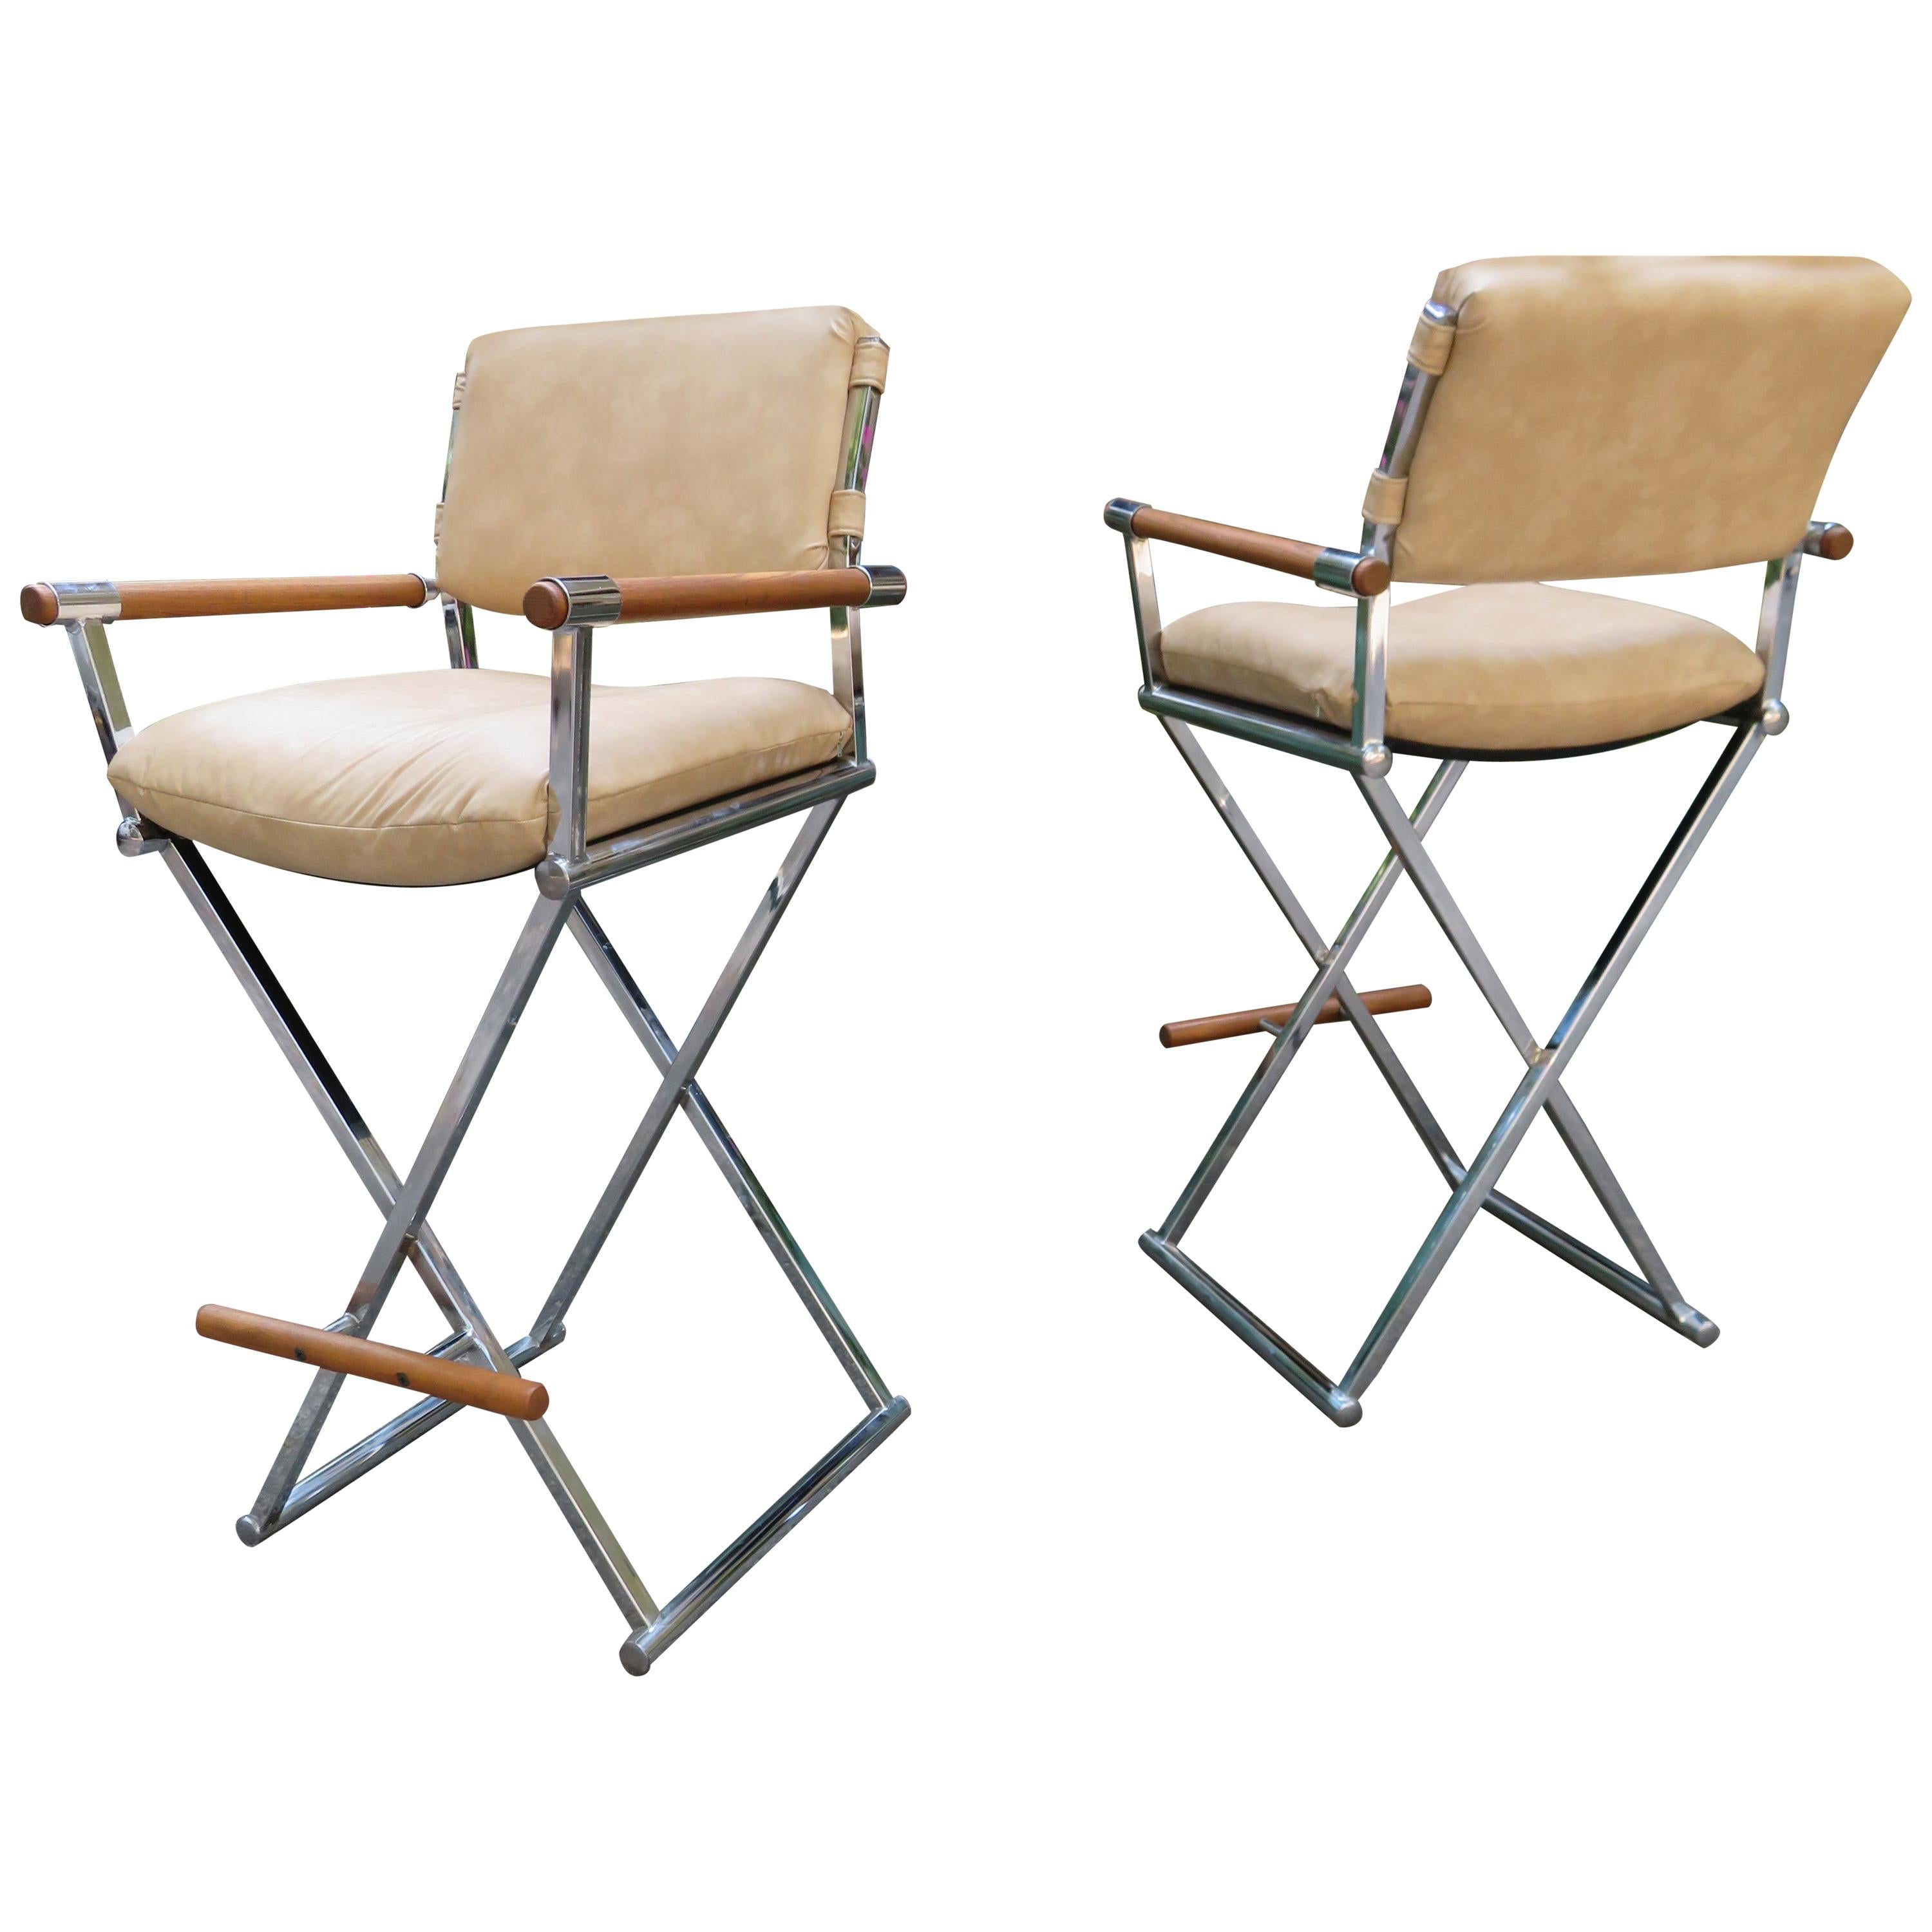 Pair of Handsome Milo Baughman Style Chrome Directors Chair Bar Stools For Sale